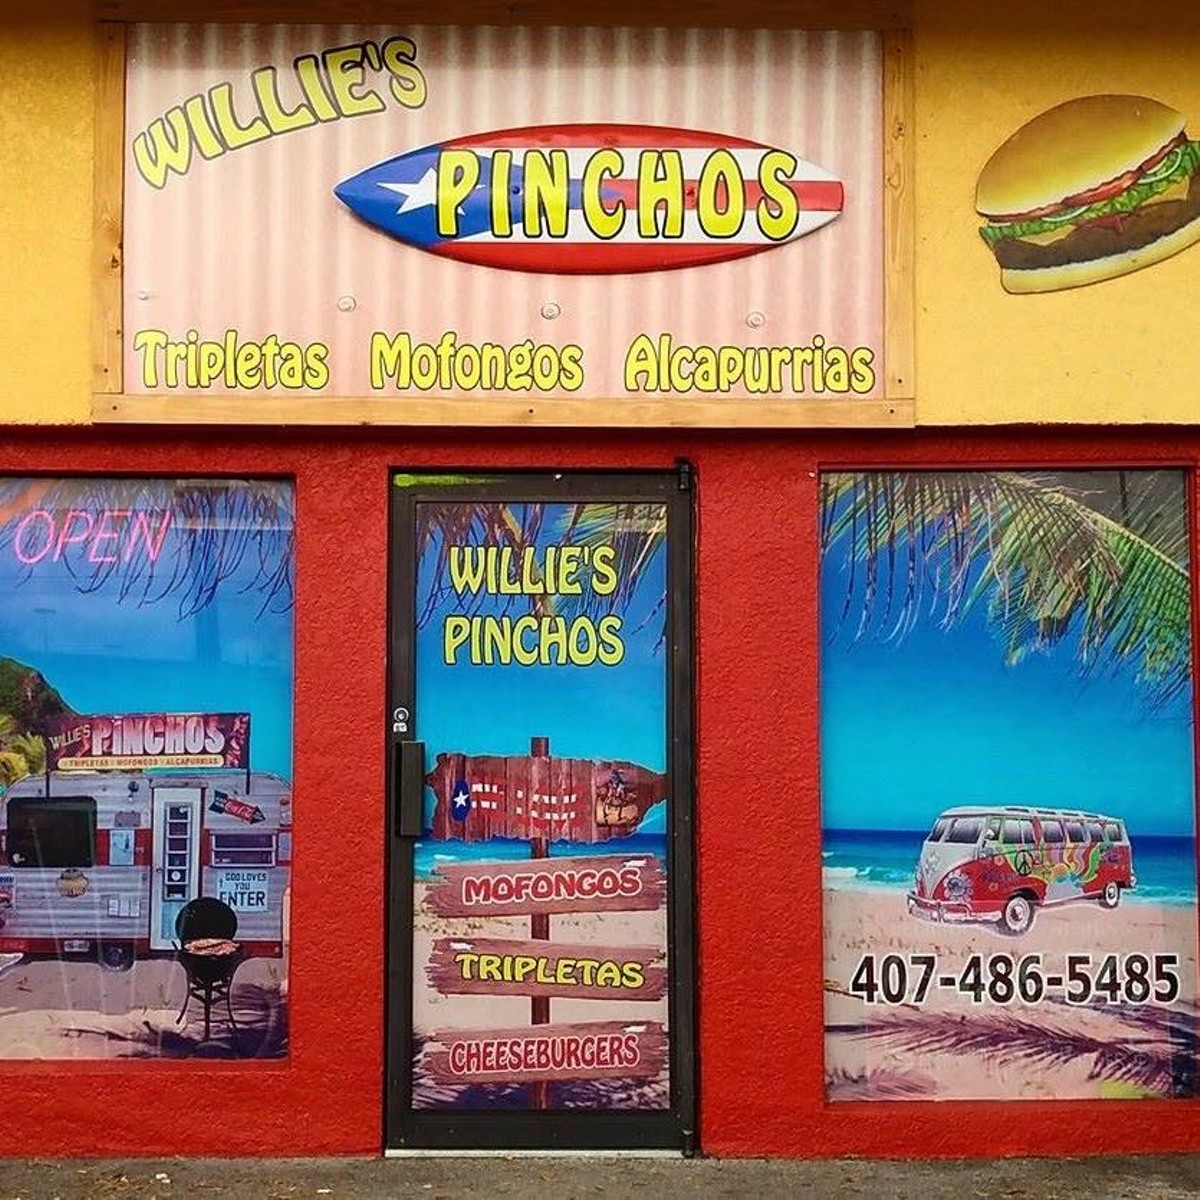 Willie's Pinchos will open a second location, you can now vote for Orlando’s Signature Dish, plus more in our weekly food roundup